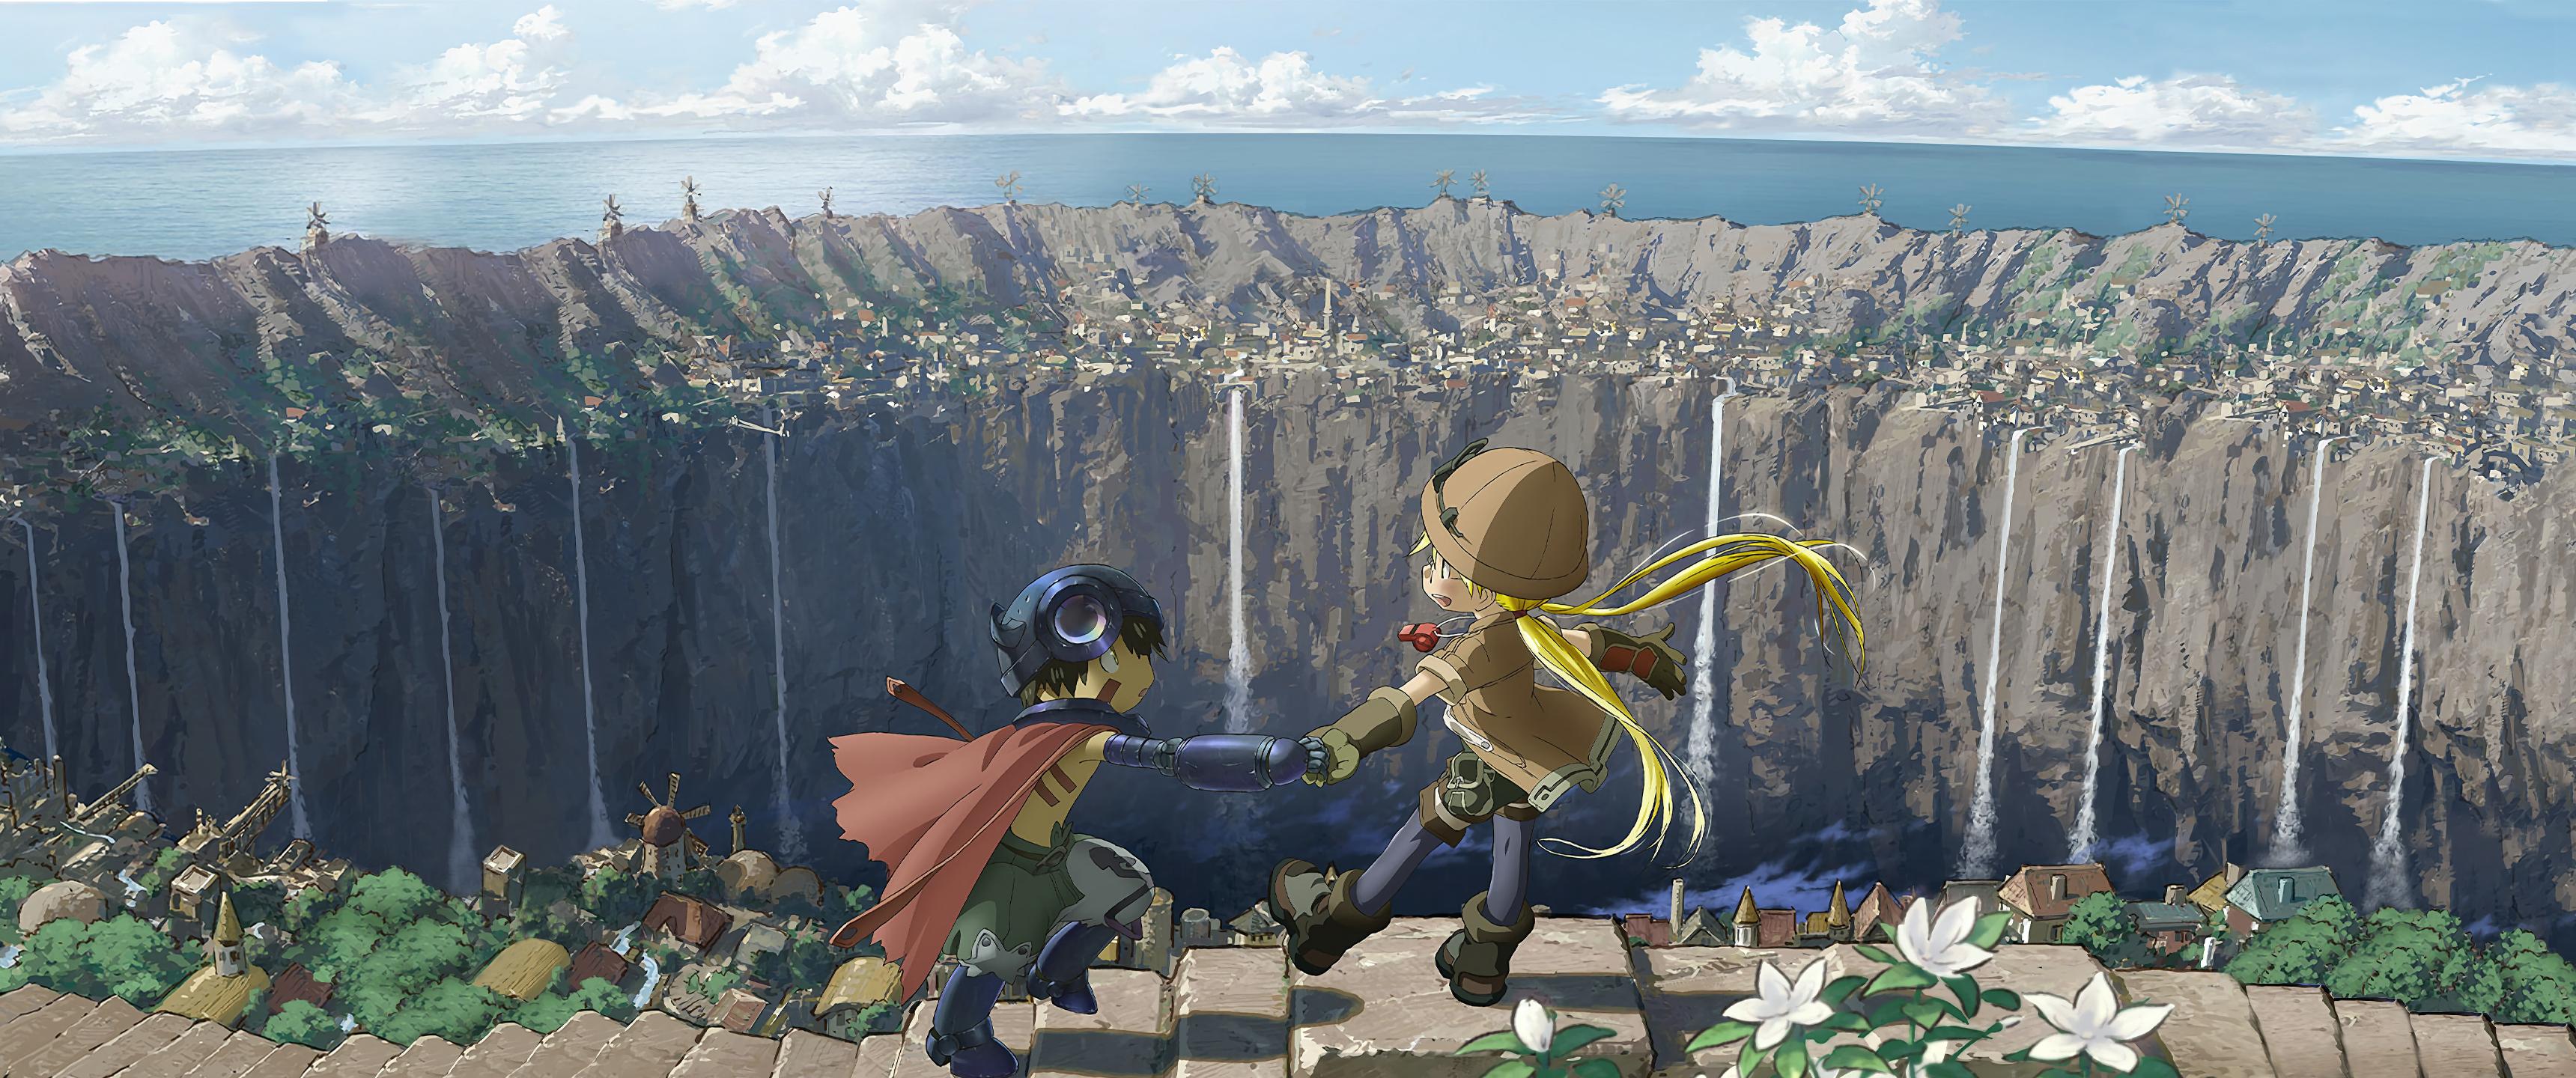 Made In Abyss Ultrawide Anime Landscape 3440x1440 Wallpaper Wallhaven Cc